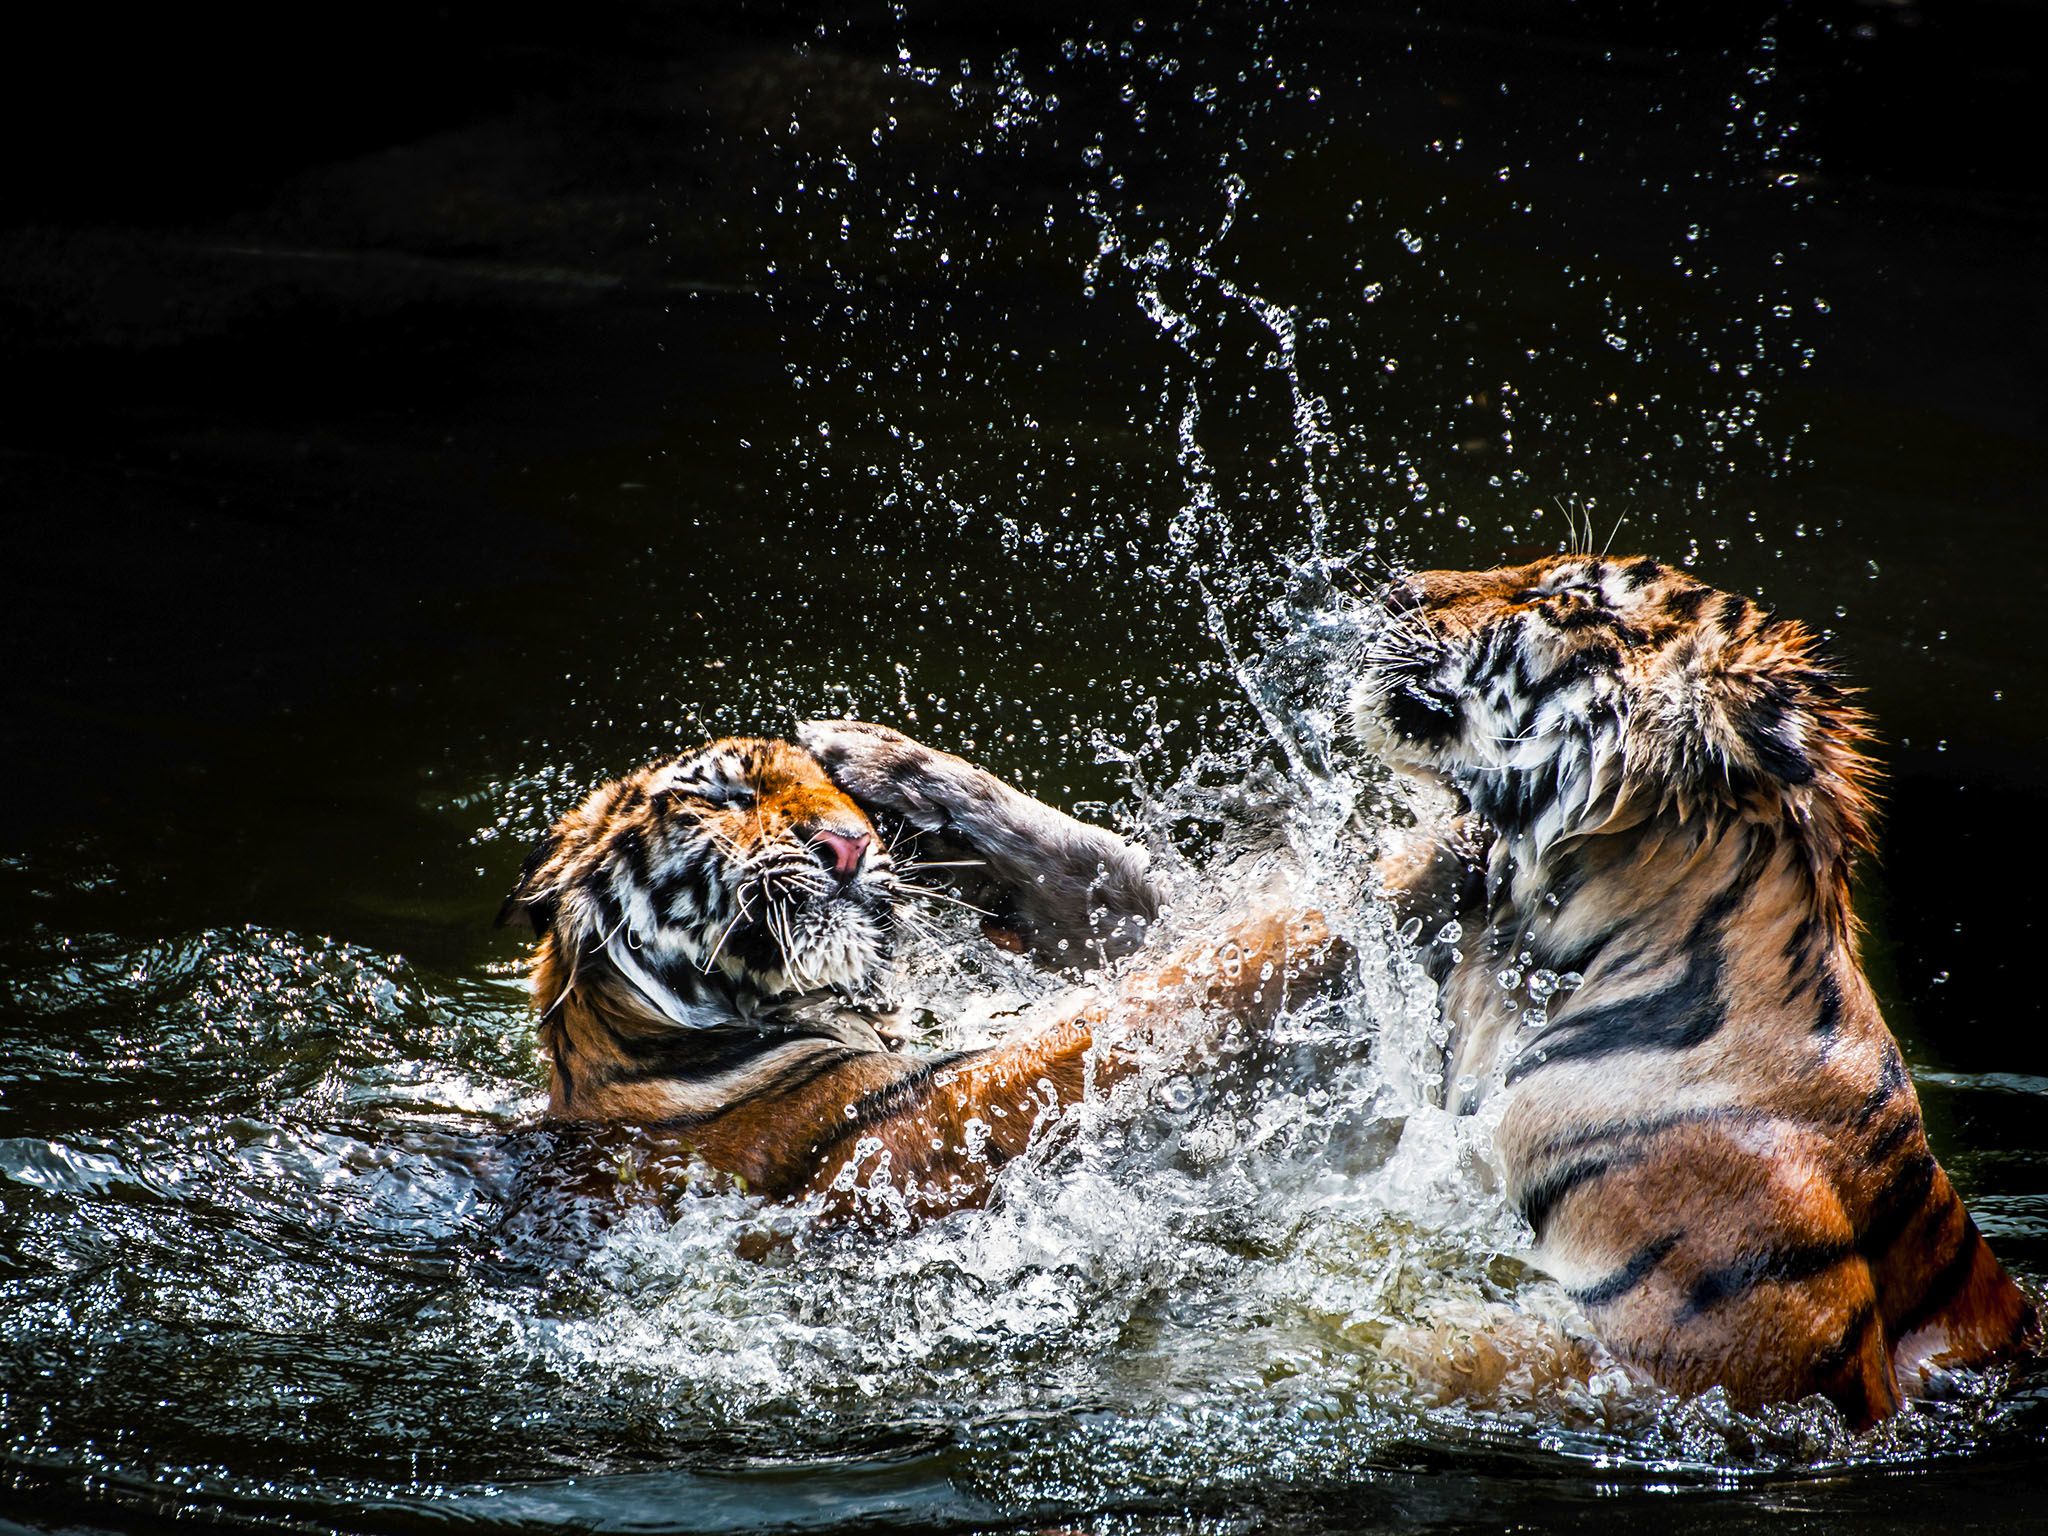 Tigers wrestle in the water. Tigers usually live 8 to 10 years in the wild. This image is from... [Photo of the day - September 2015]